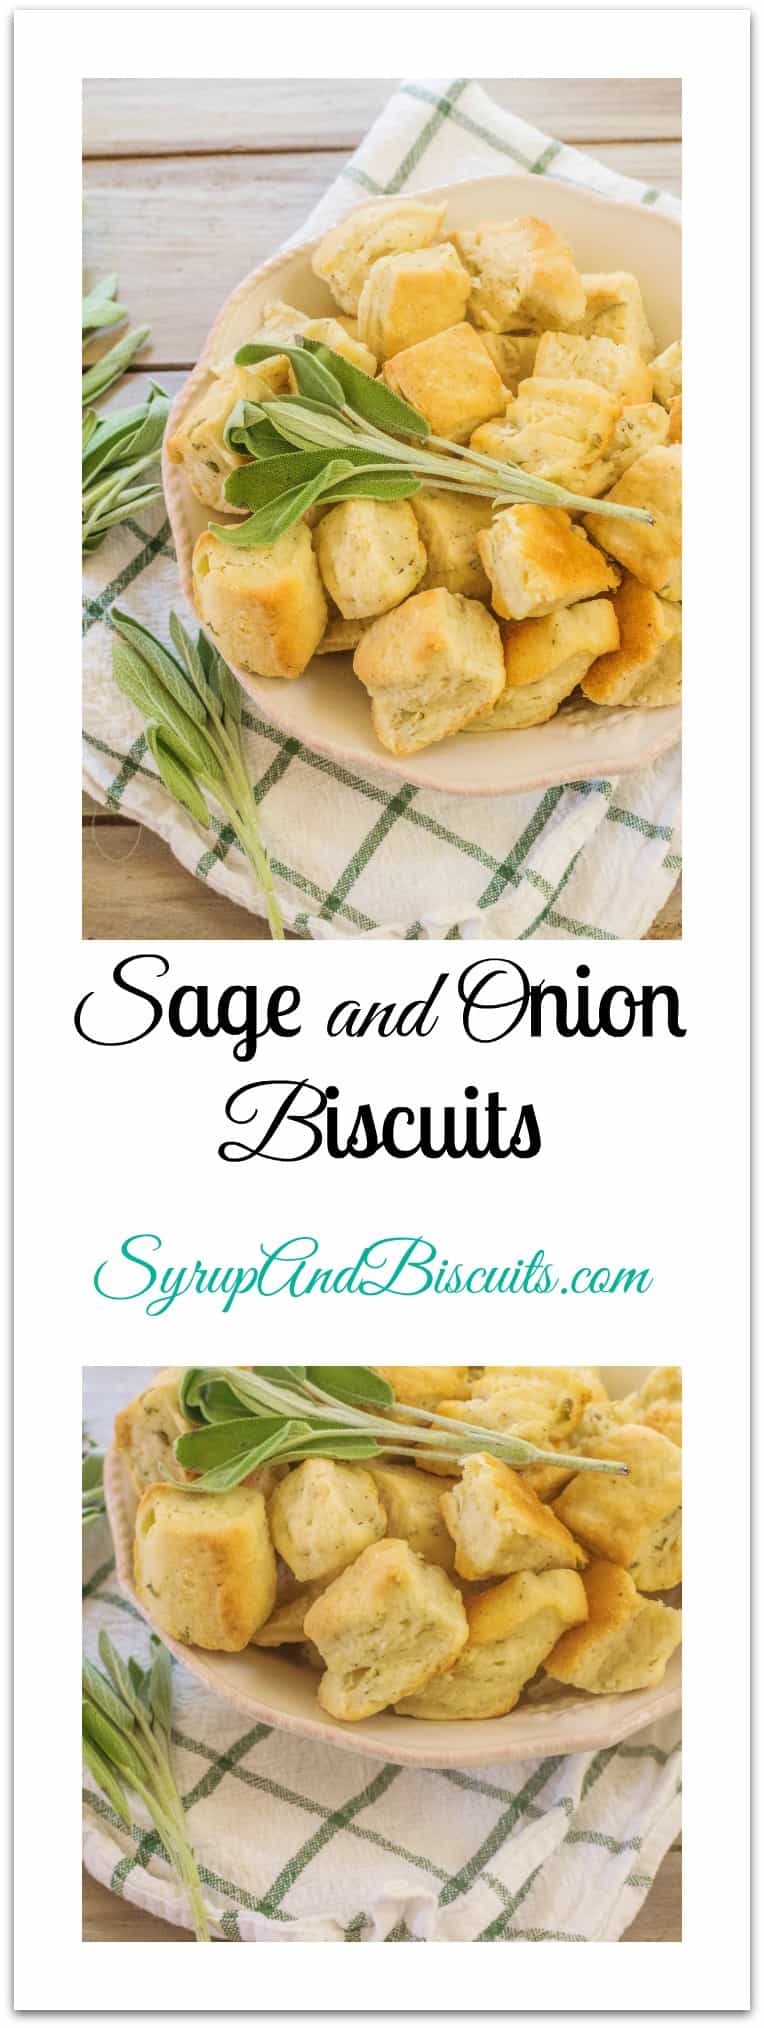 Sage Onion Biscuits are a great addition to the buttermilk cornbread in Traditional Buttermilk Cornbread Dressing. Sage, onion, garlic and black pepper also create a dinner biscuit  that goes well along side poultry and pork.